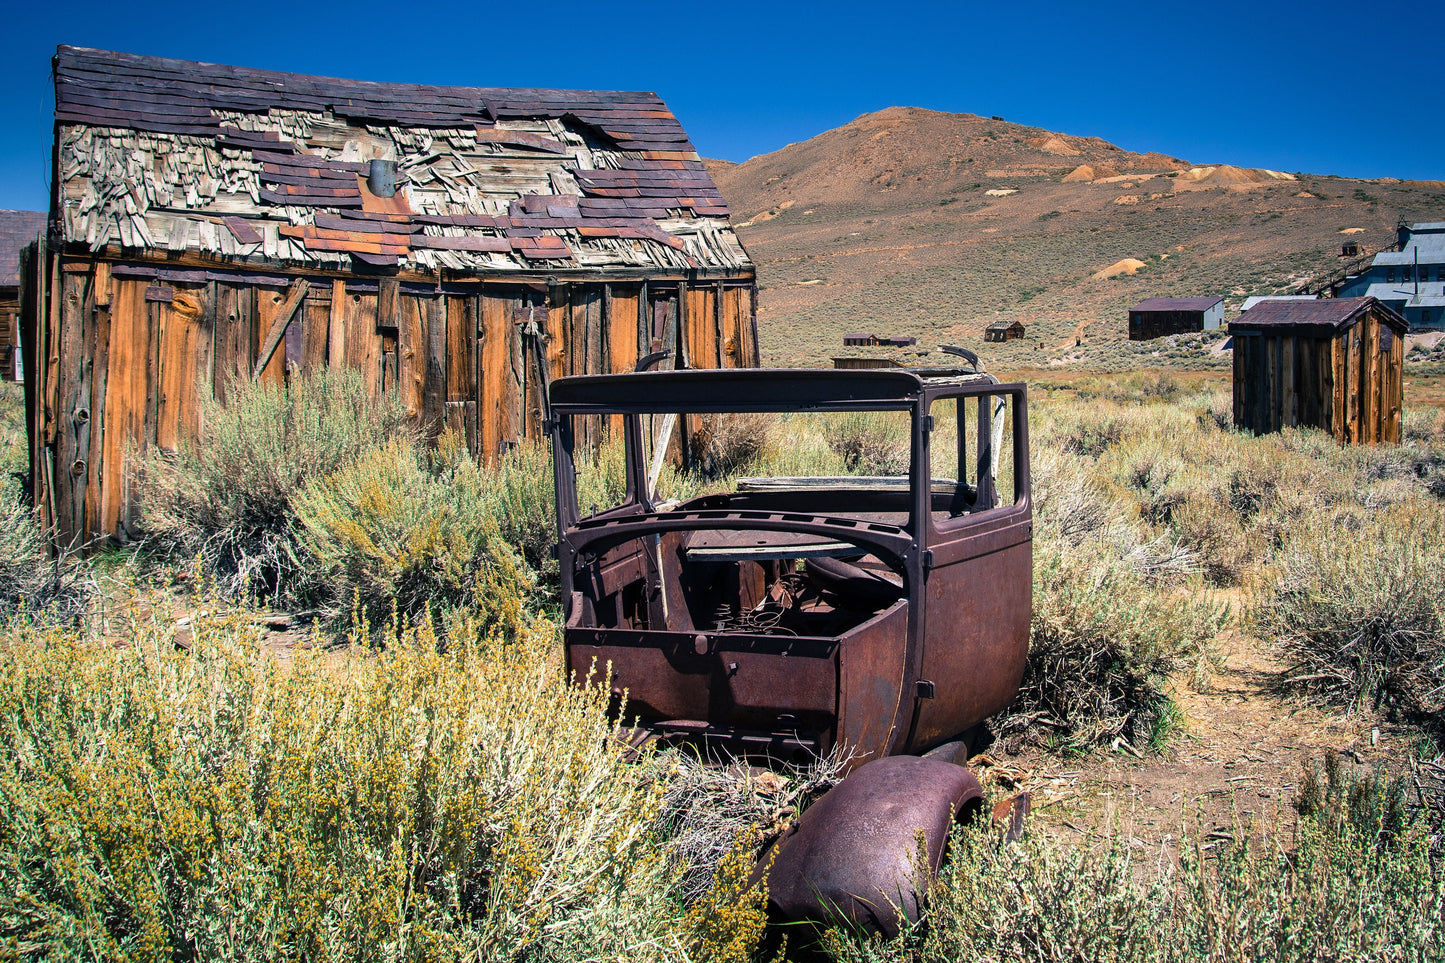 Ghosts of Bodie #1, Ghost Town, Model A Ford, California Wall Art, Vintage Car Art, Classic Car Decor, Abandoned Town Art, Man Cave Decor